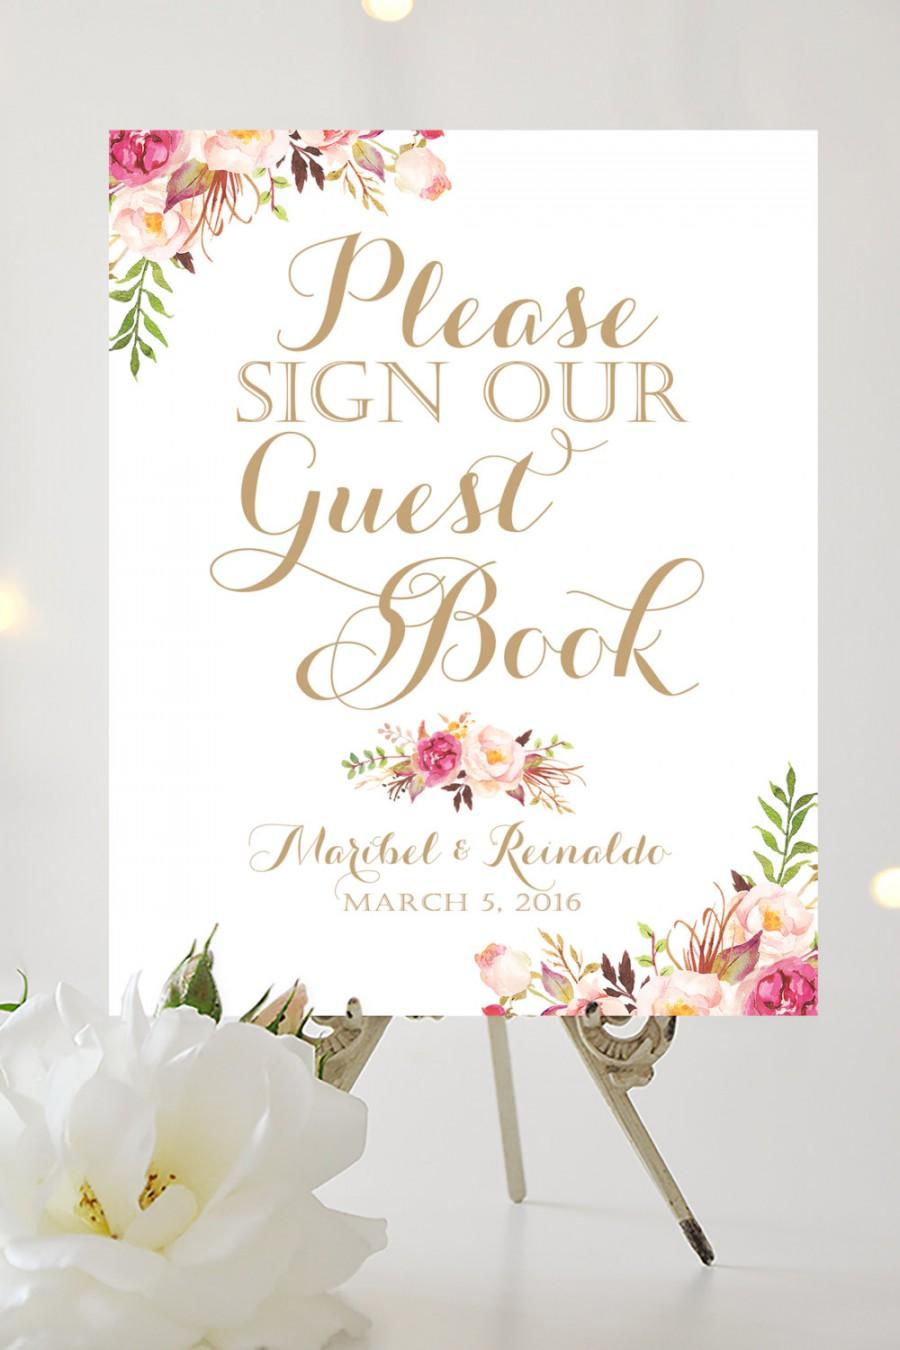 Wedding - Please Sign Our Guest Book 